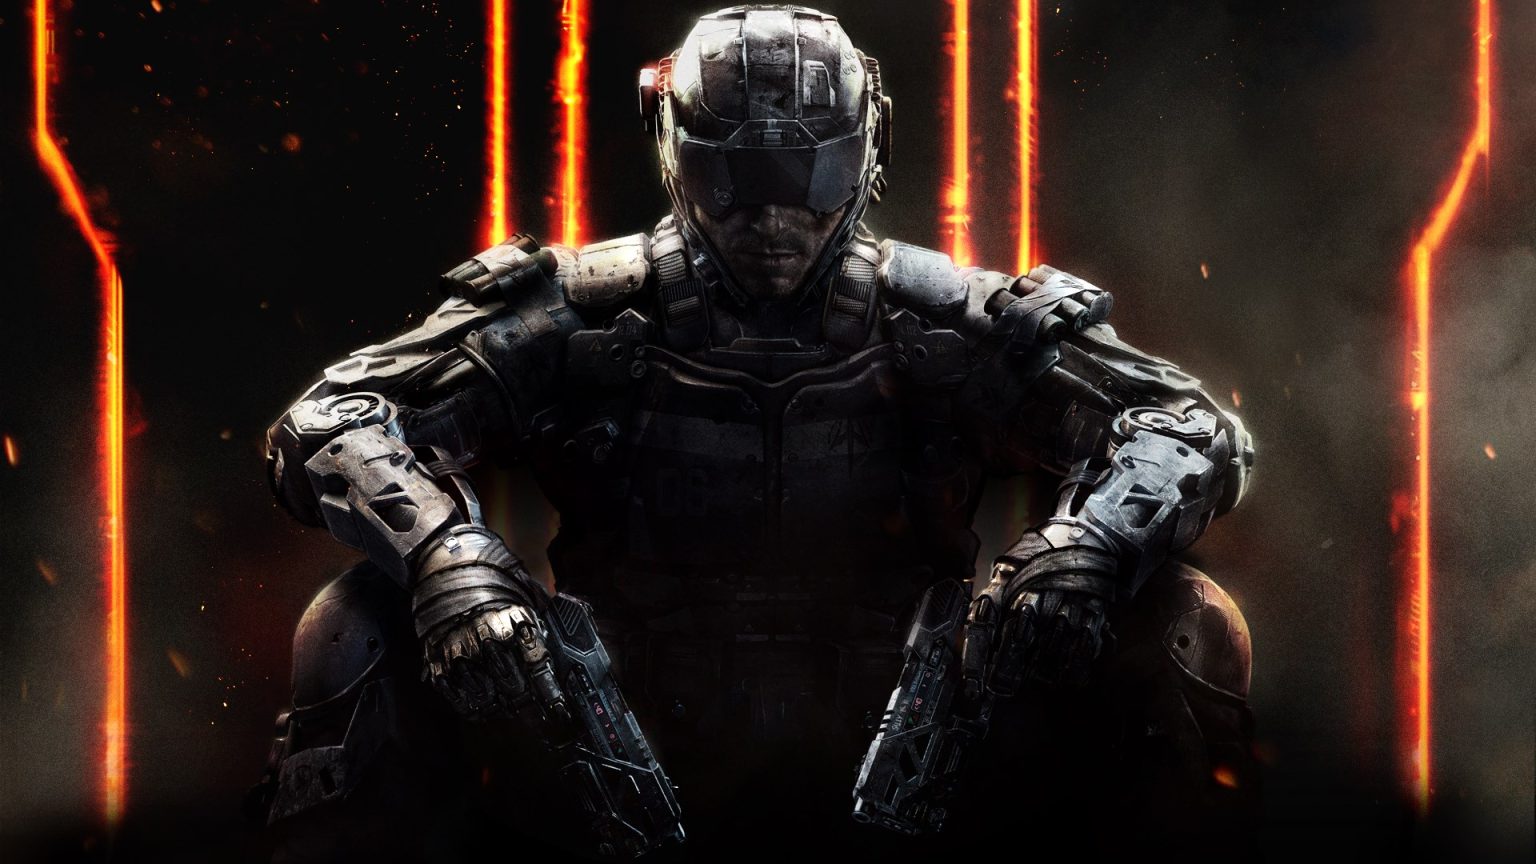 Take a Bow achievement in Call of Duty: Black Ops III